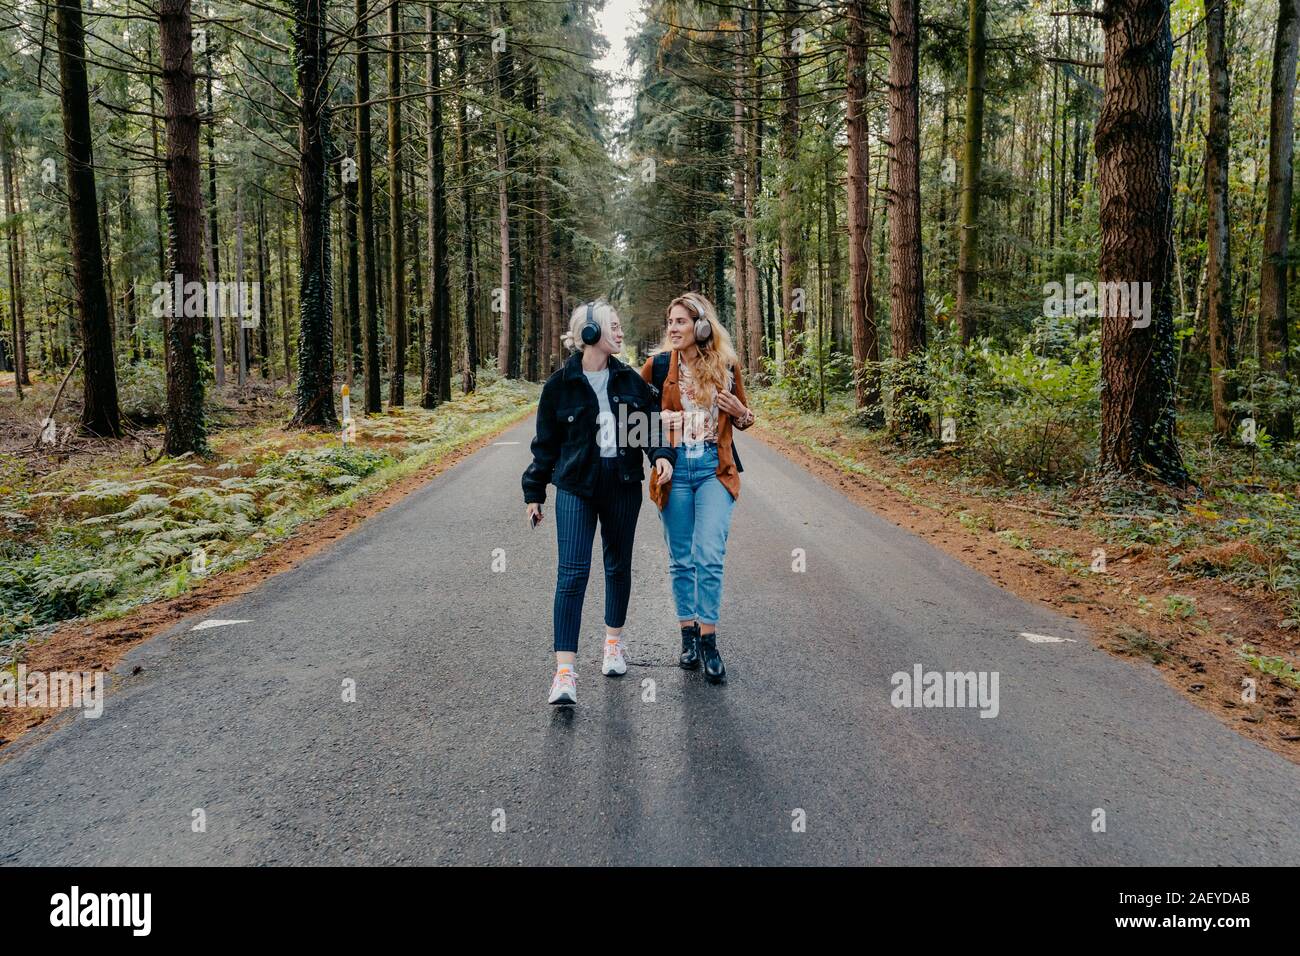 Two women walking on a road in the forest while listening to music Stock Photo